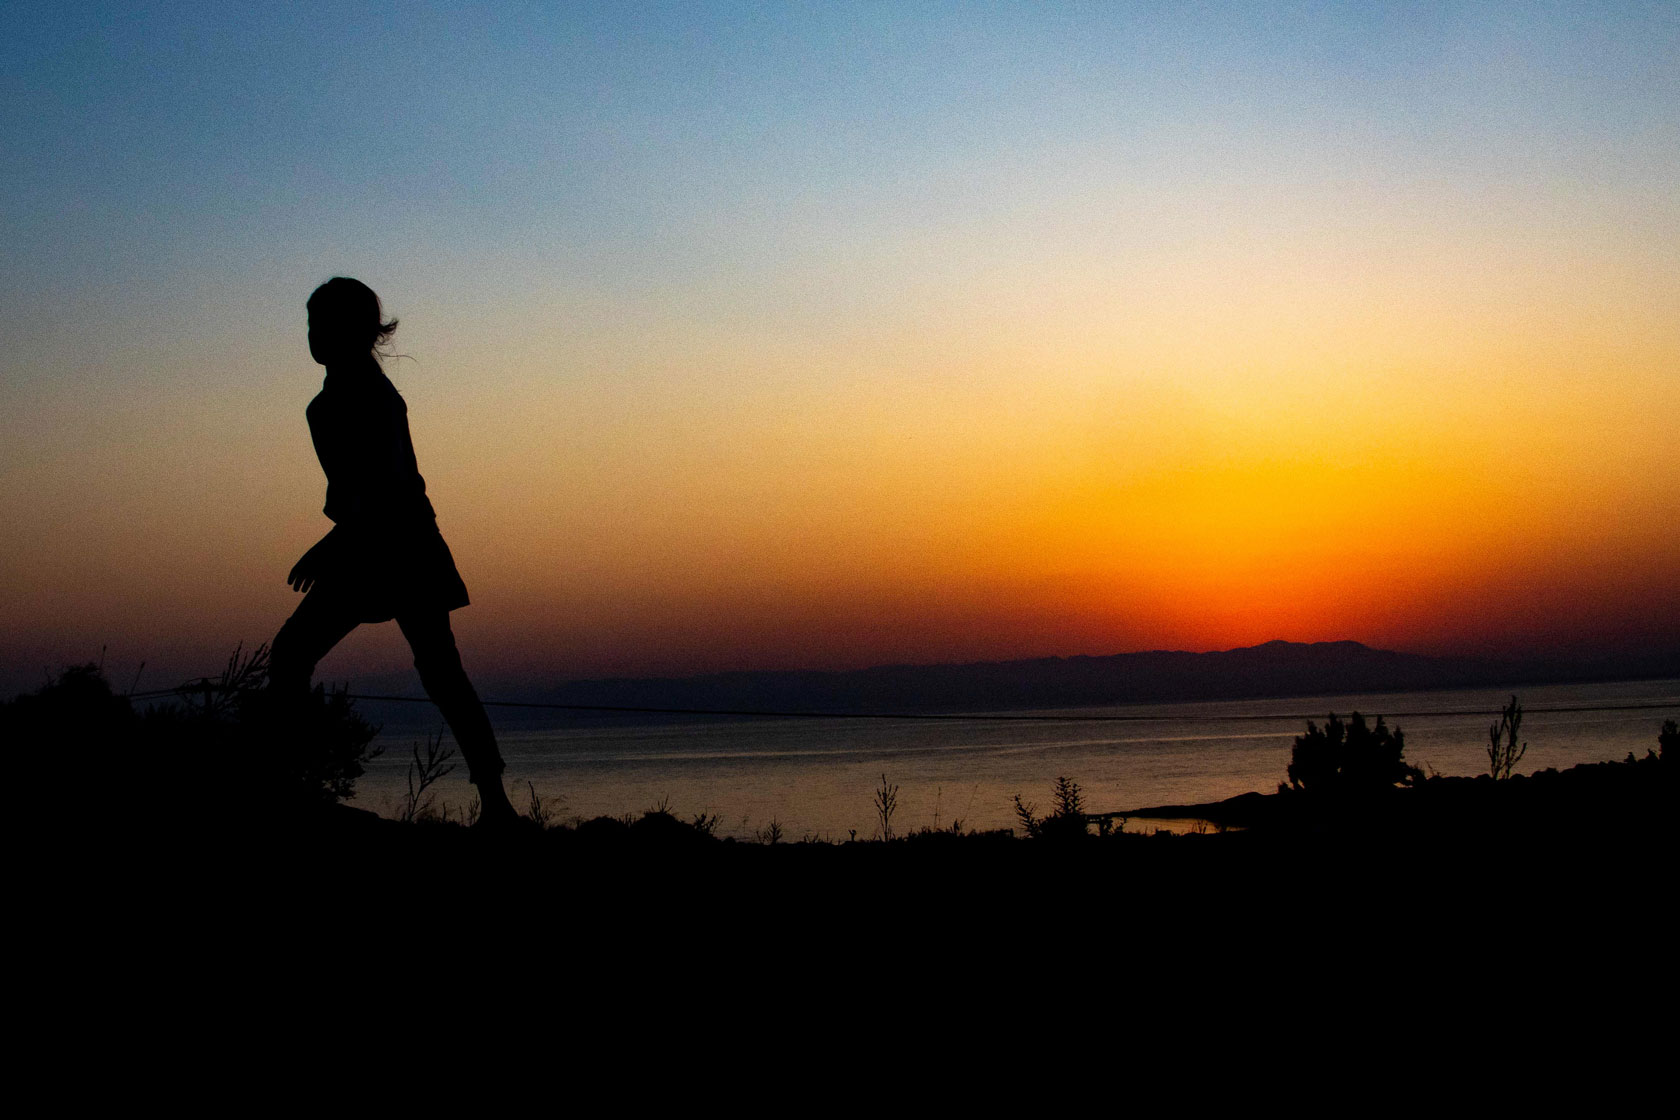 The silhouette of a girl walking as the sun rises